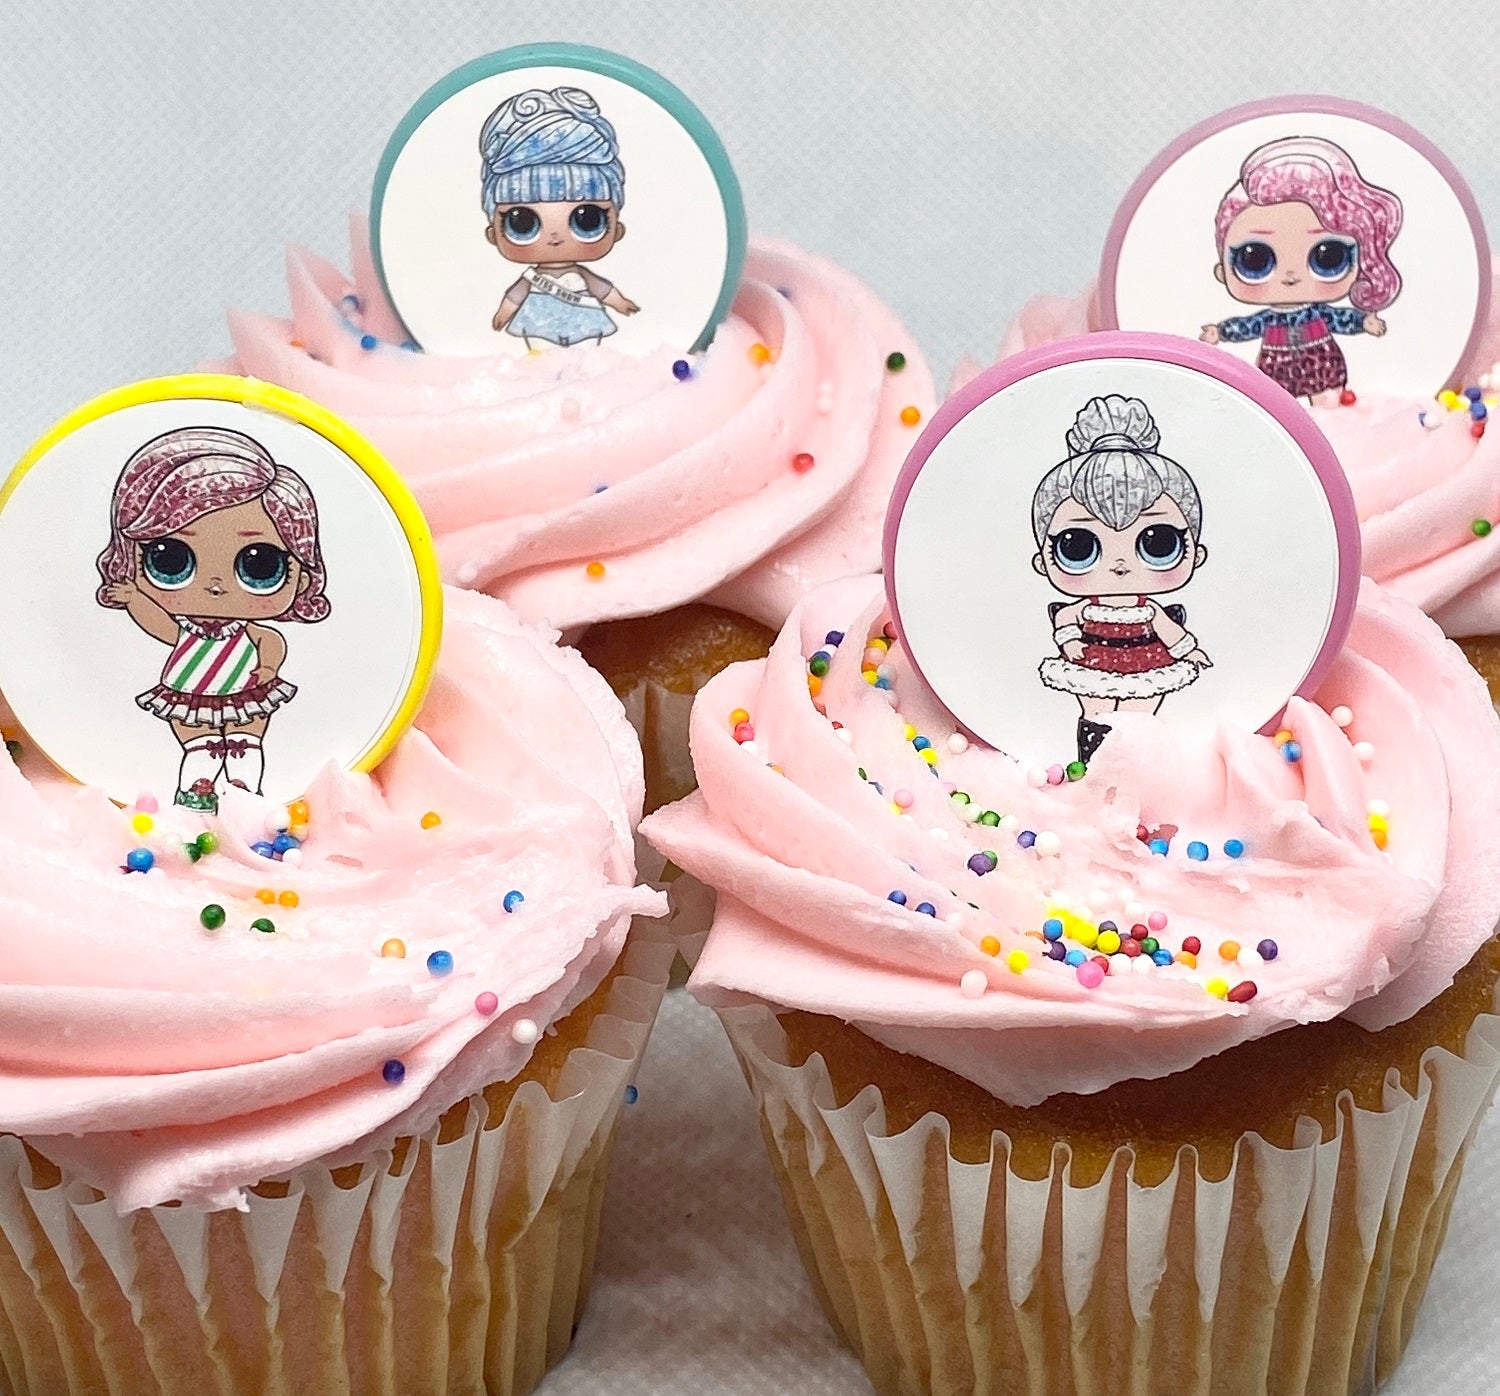 LOL Surprise Glitter Cupcake Toppers Cake Decorations Party Favors ...